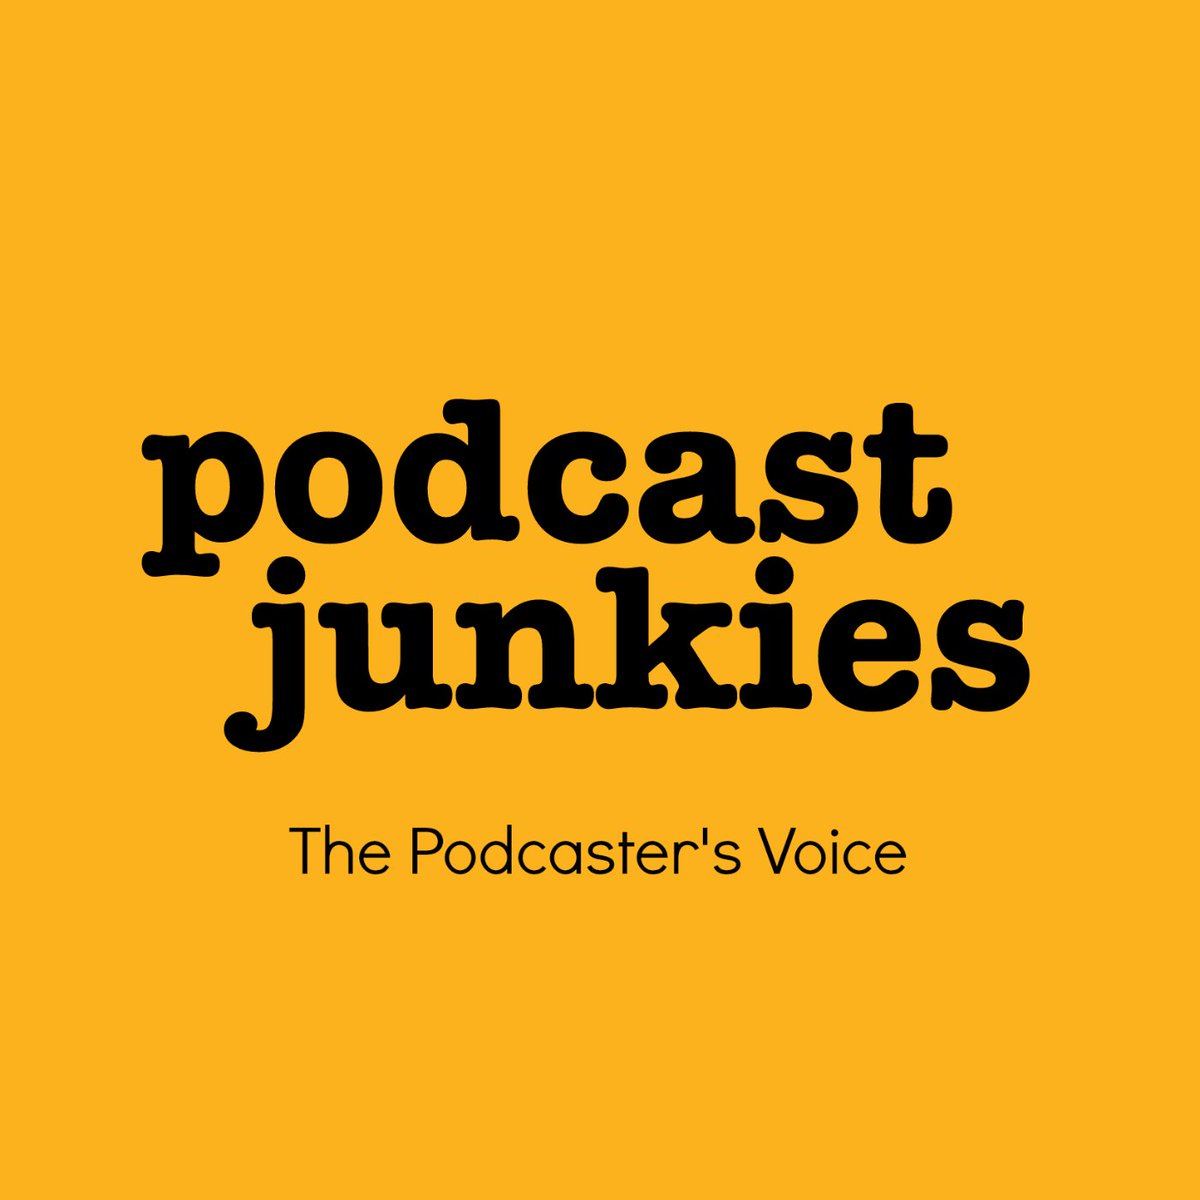 9/2014... http://prdcnf.com  (riding the wave to websites with no vowels, I had the bright idea to launch a productivity conference)2015 http://podcastjunkies.com  (OK, might be on to something here)